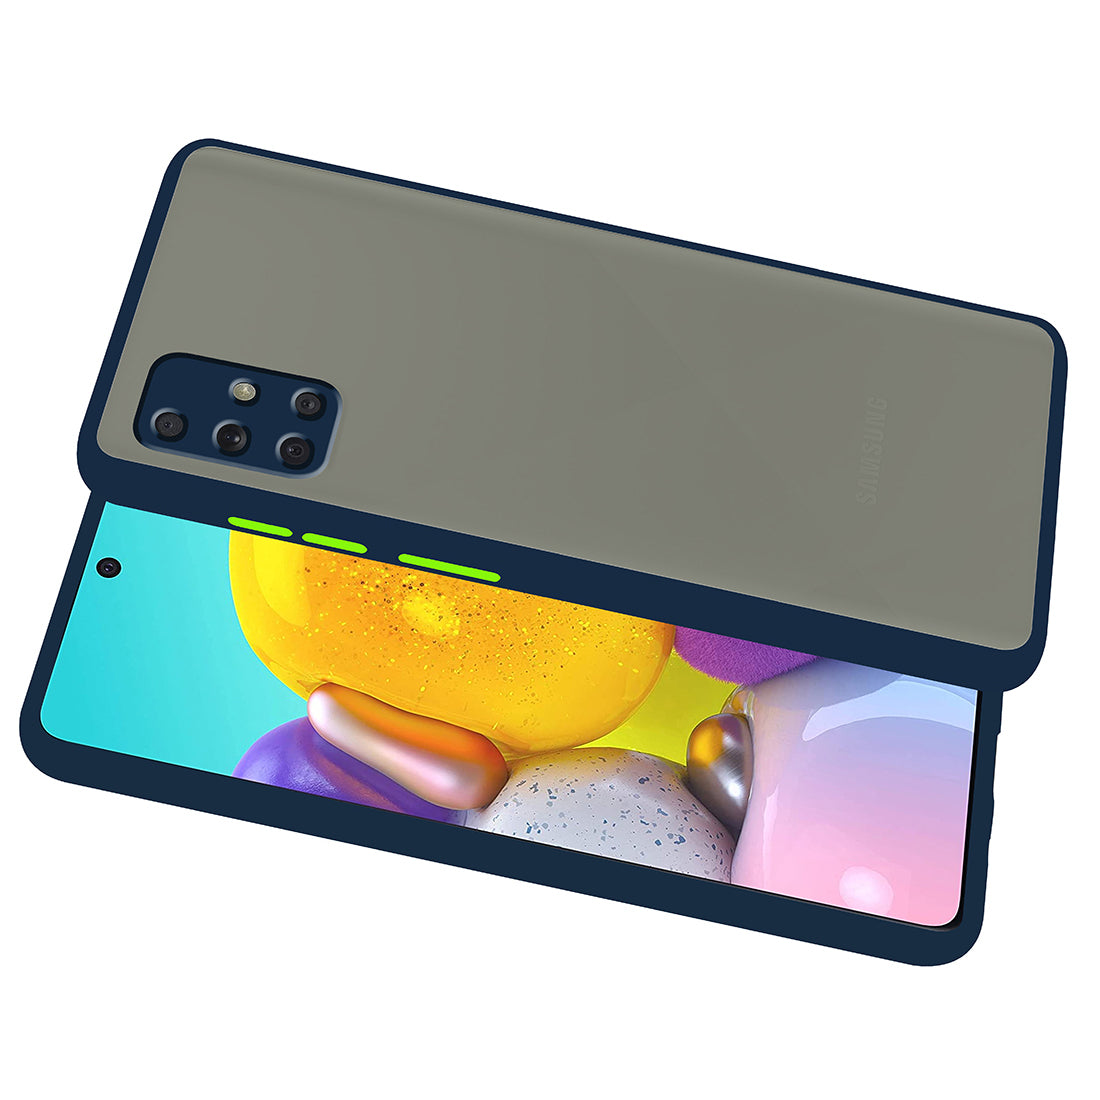 Smoke Back Case Cover for Samsung Galaxy A71